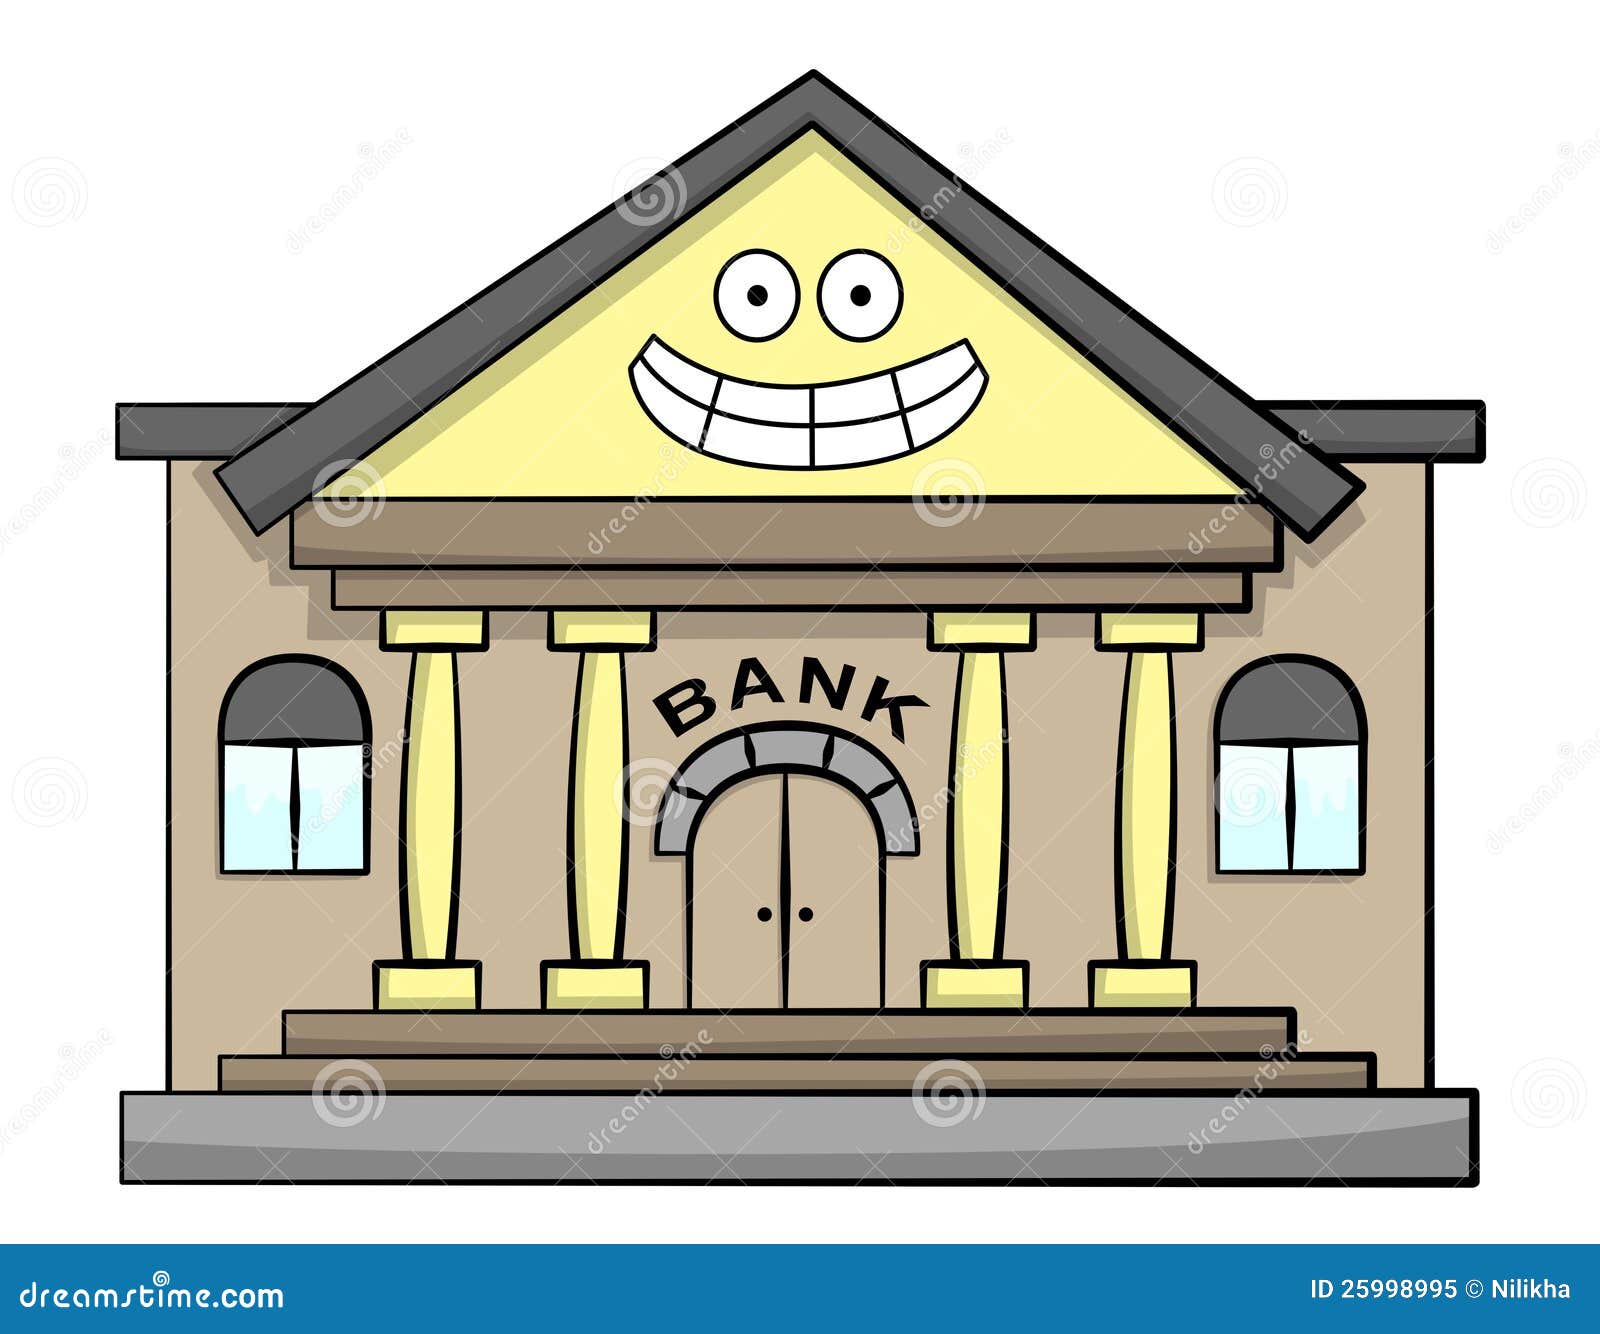 bank clipart images - photo #9